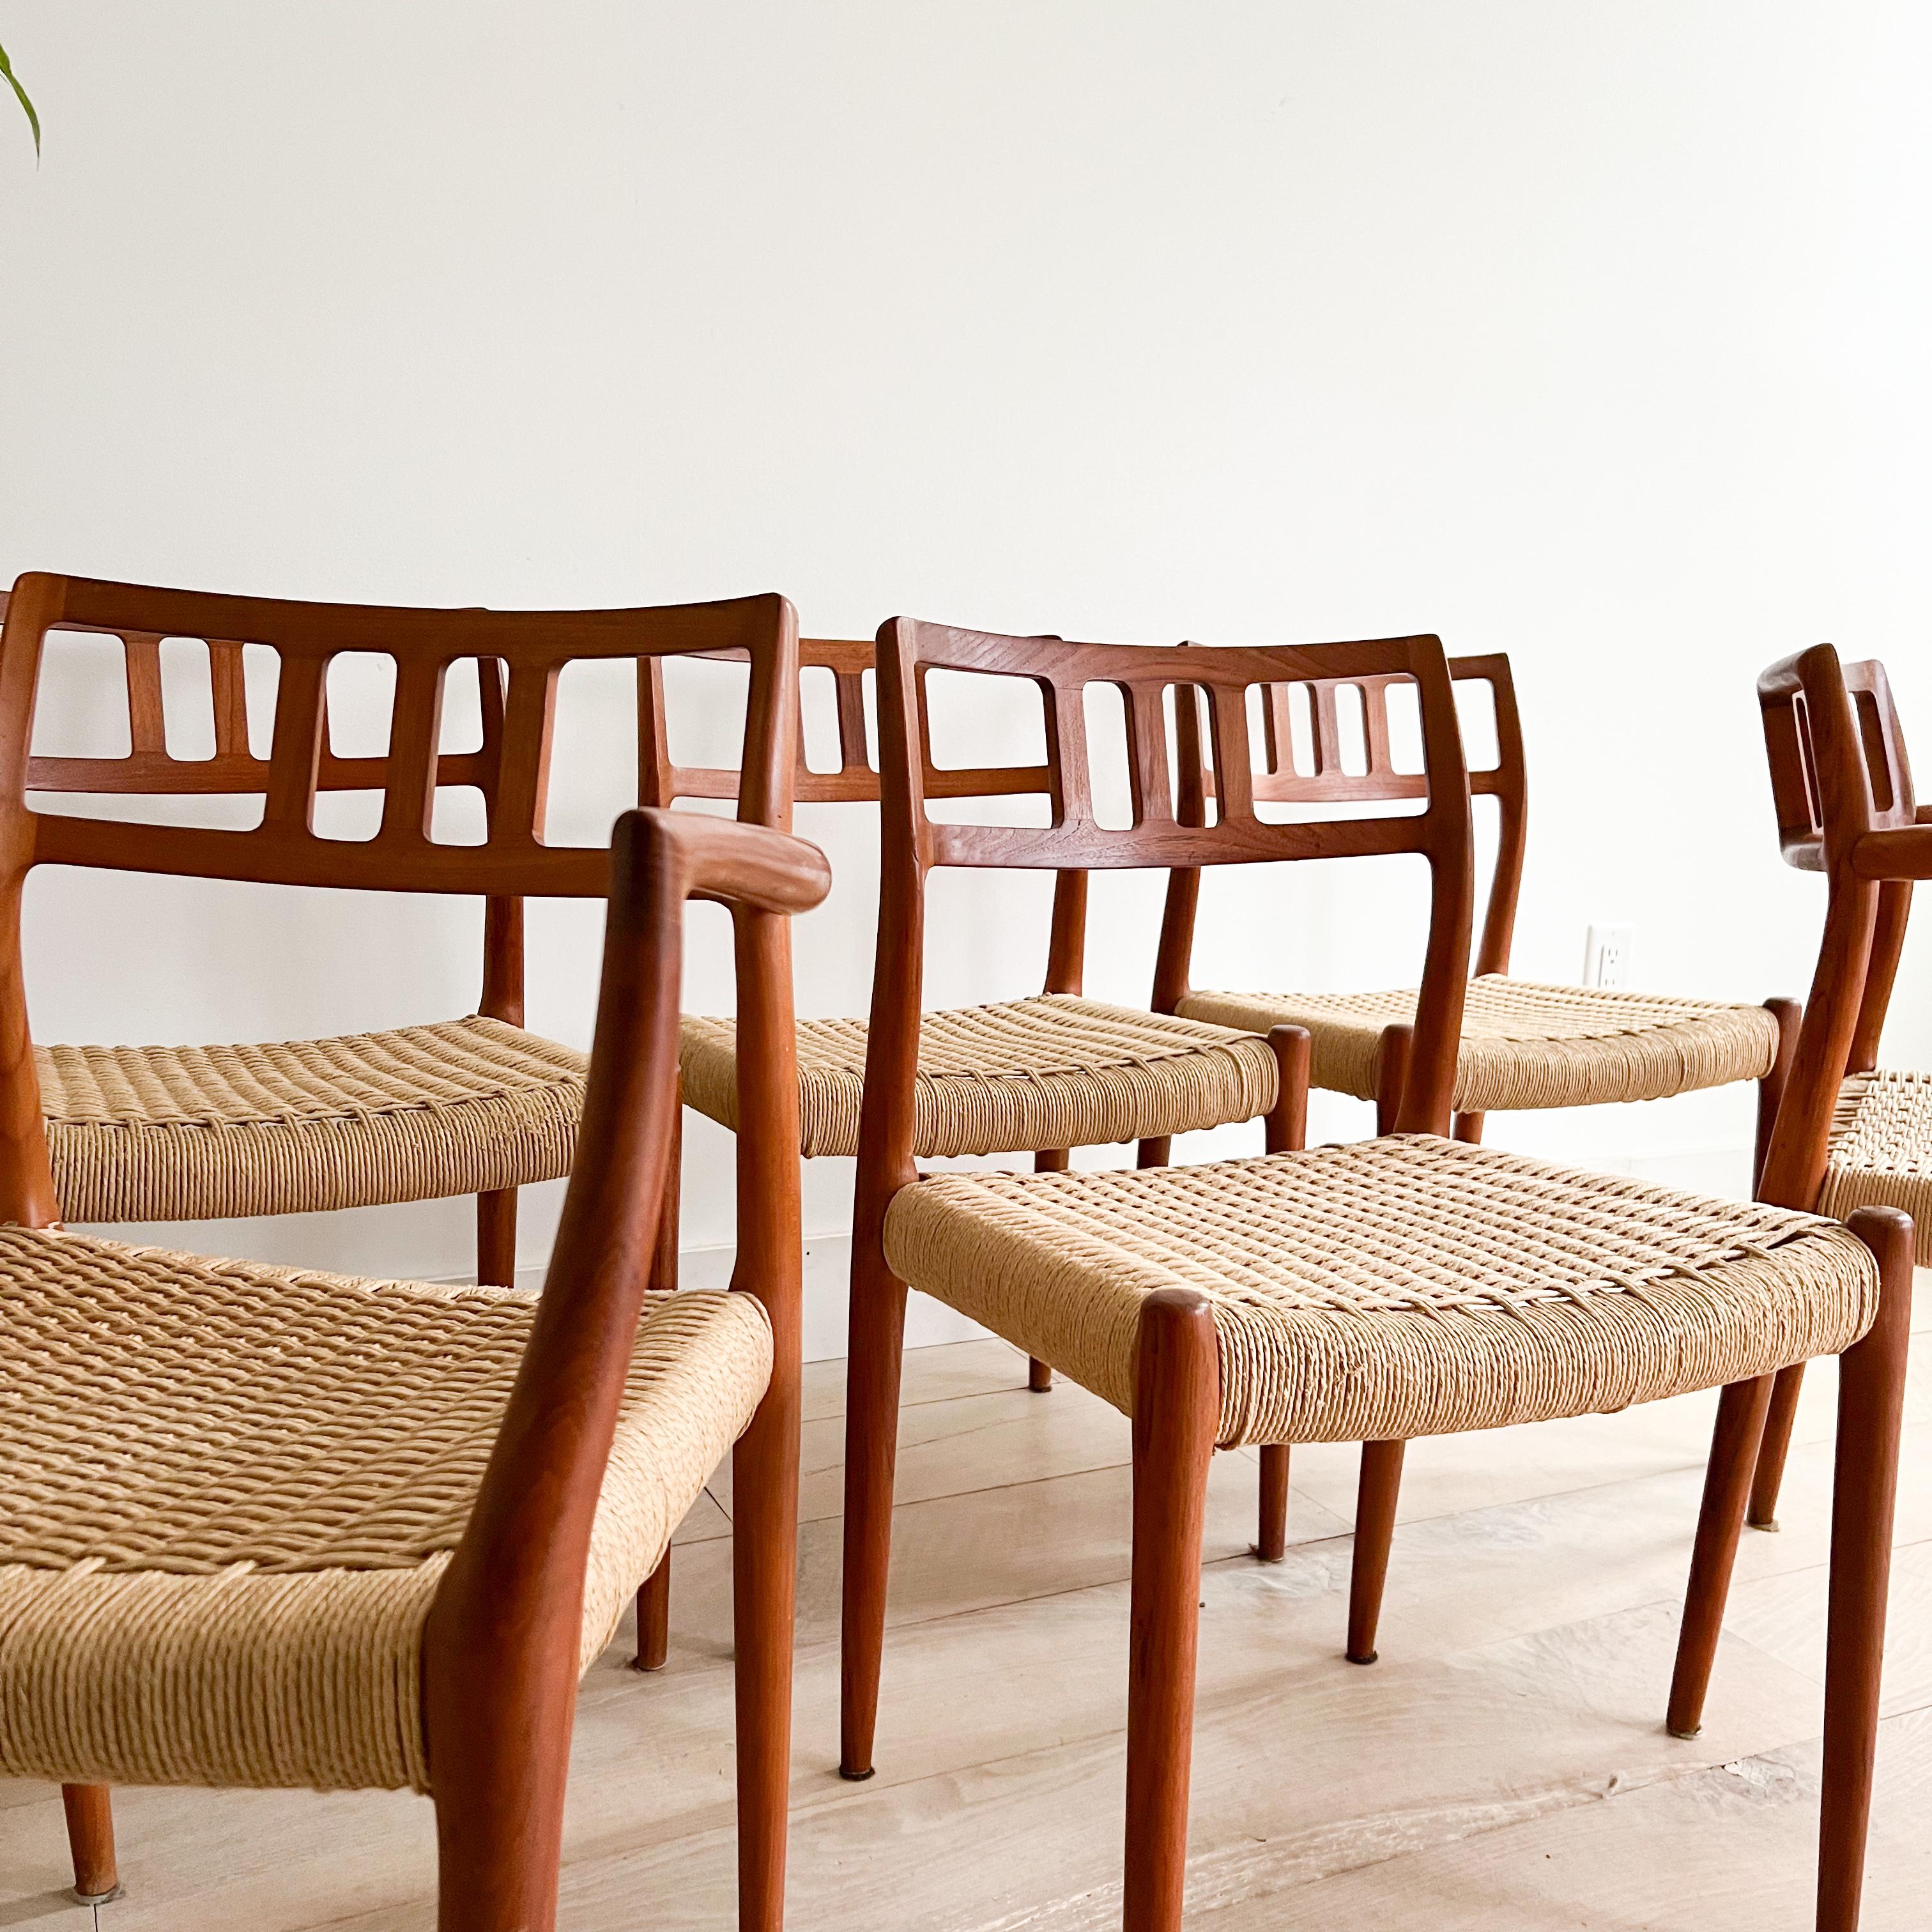 Set of 6 mid century modern Niels Moller for J.L. Moller teak dining chairs - Model 79 and 64

2 armchairs and 4 armless

The woven rope is in good condition overall with some light scuffing/light staining in a few areas (see up close photos). Some